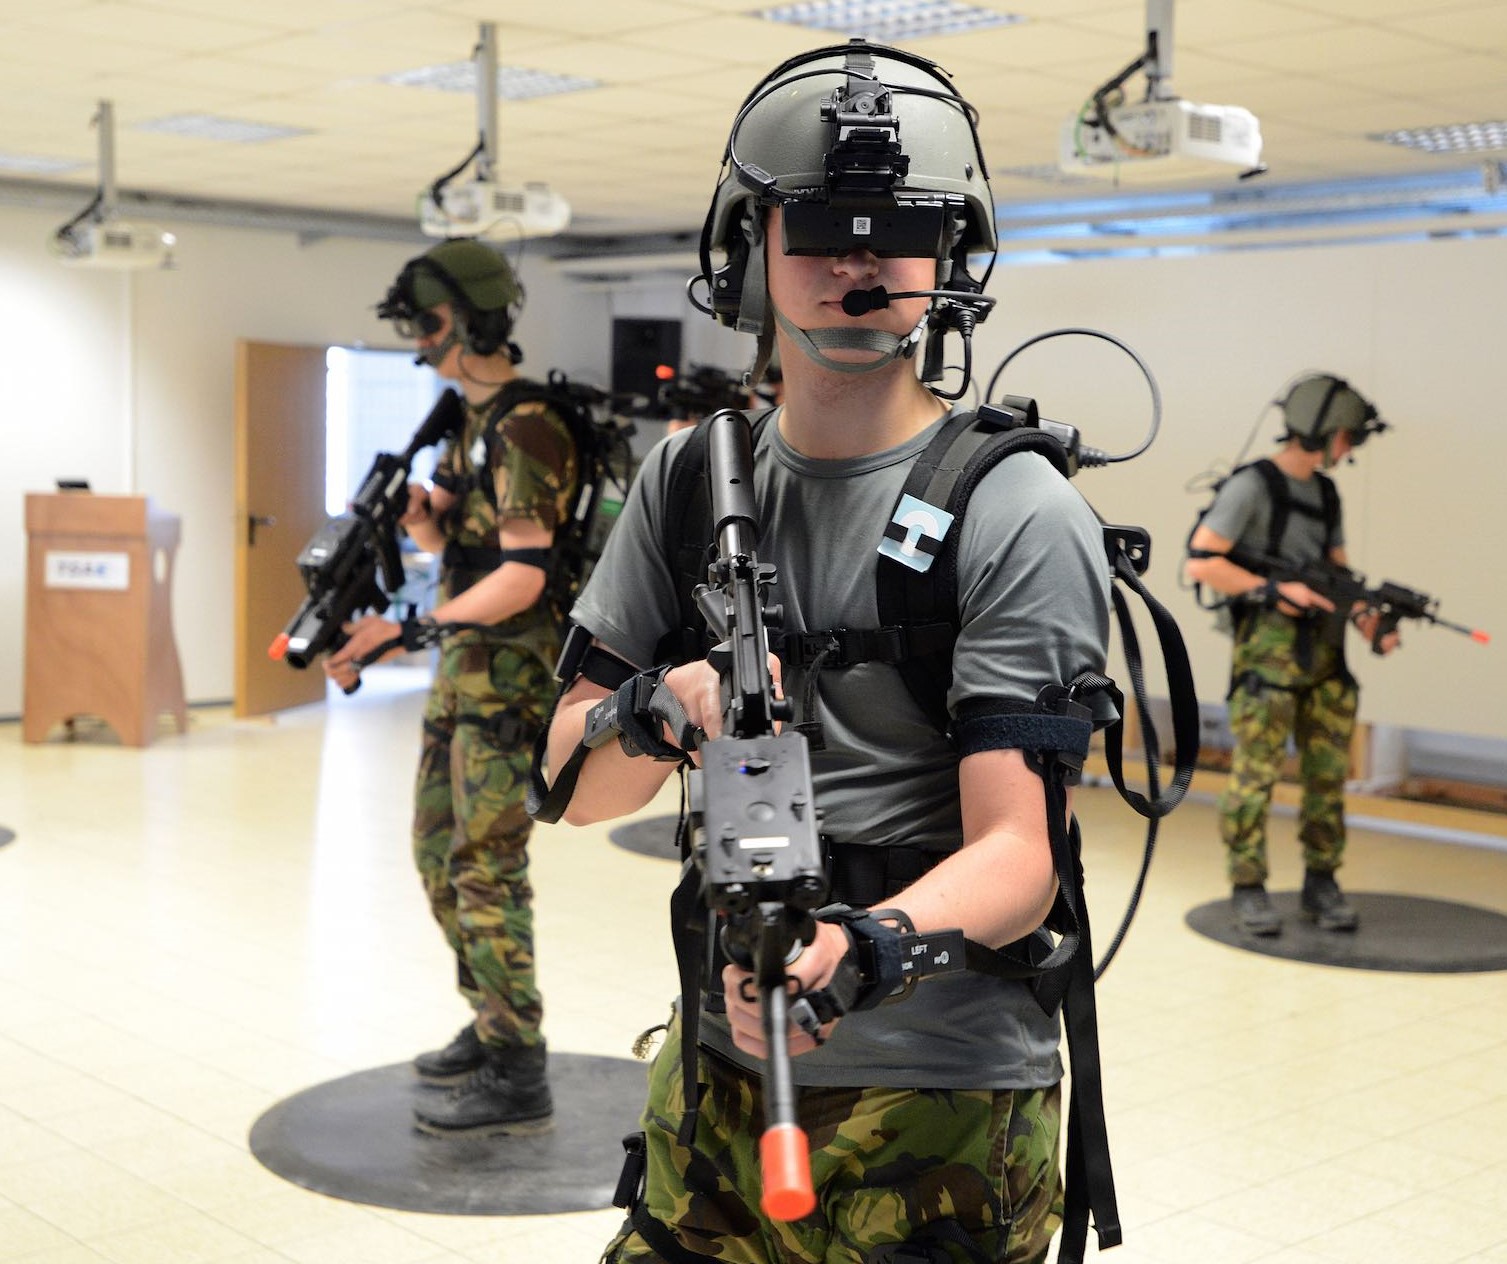 Soldiers using virtual reality to train